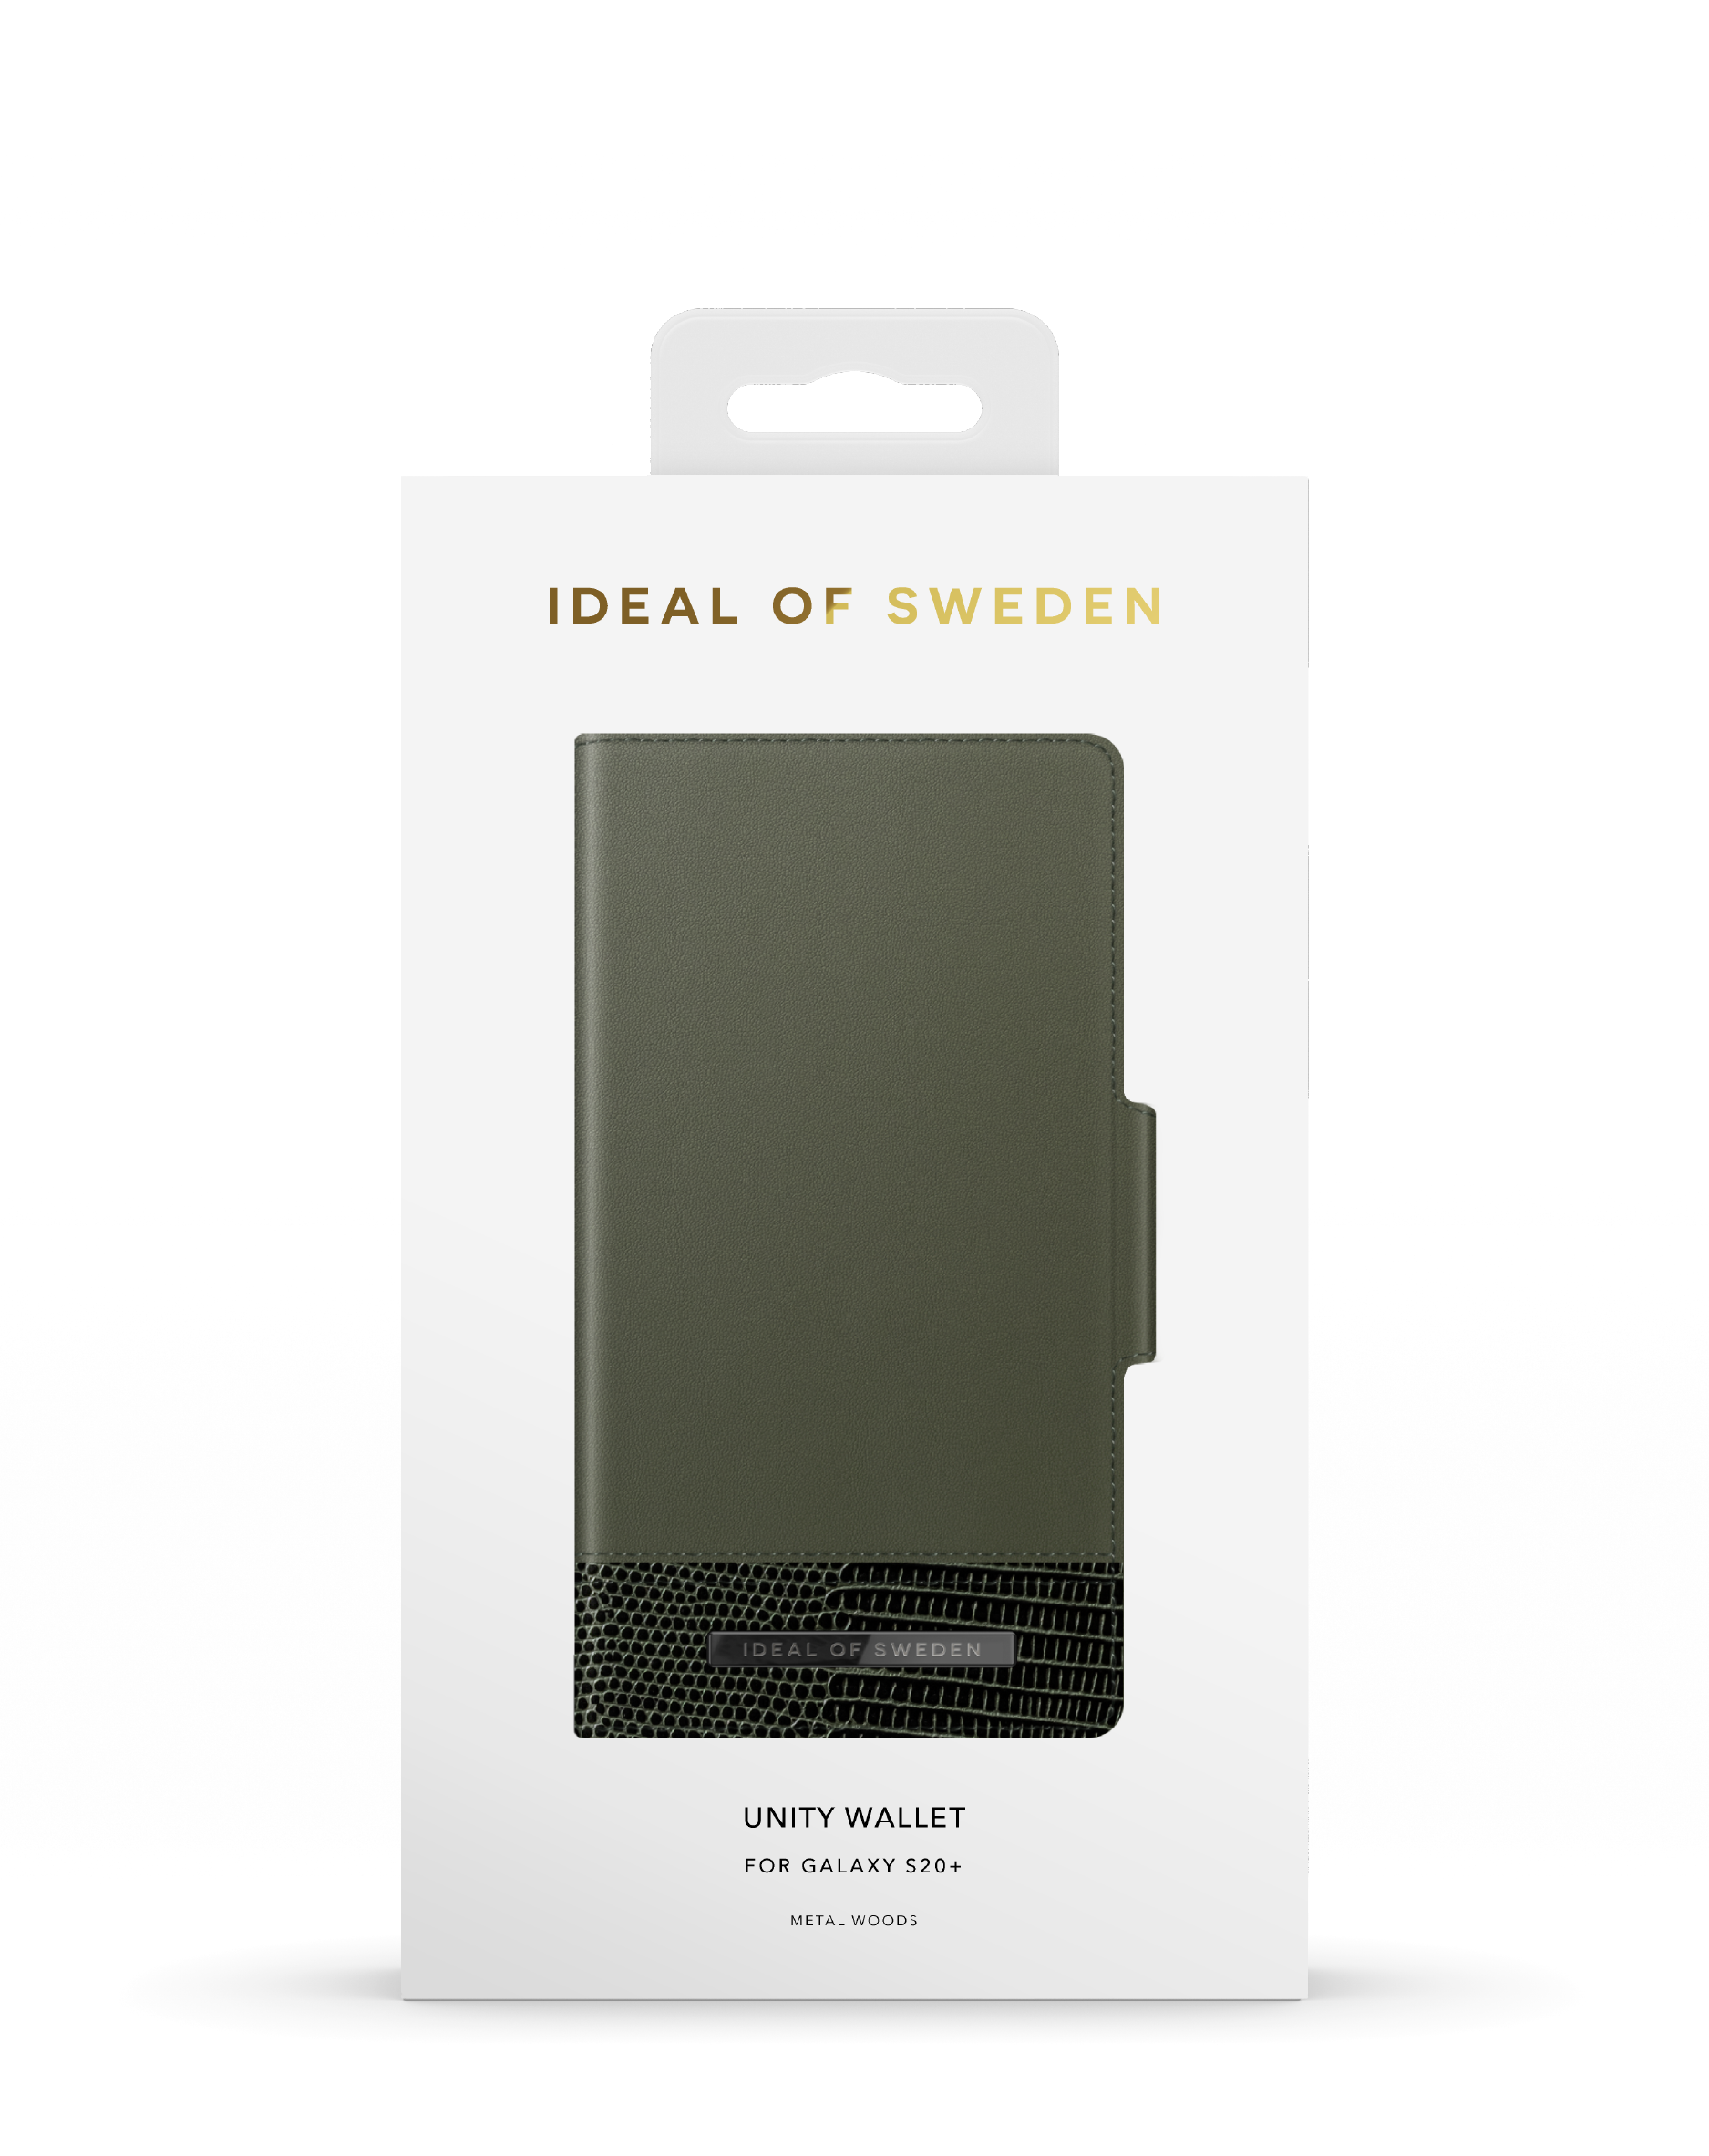 IDEAL OF Samsung, Cover, Metal Woods SWEDEN Galaxy IDUWAW20-S11-235, S20+, Full